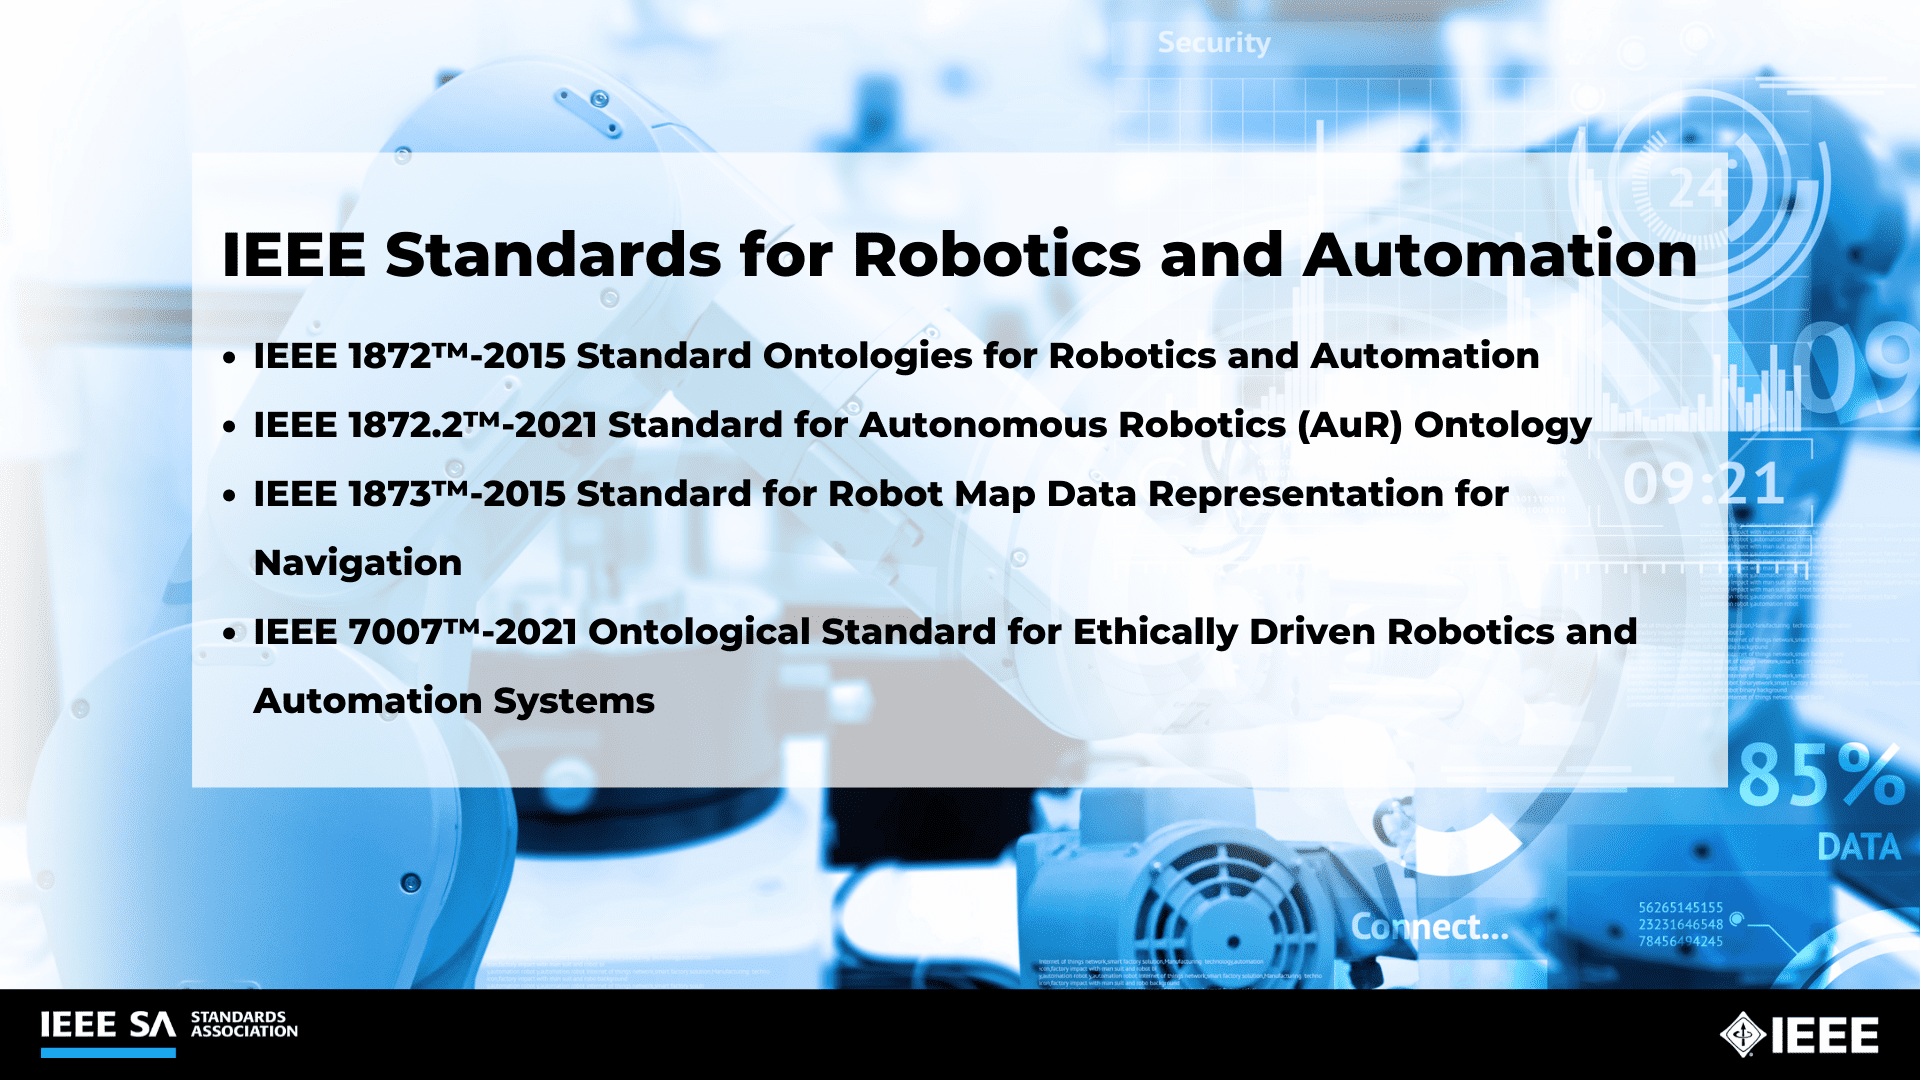 List of IEEE standards for robotics and automation